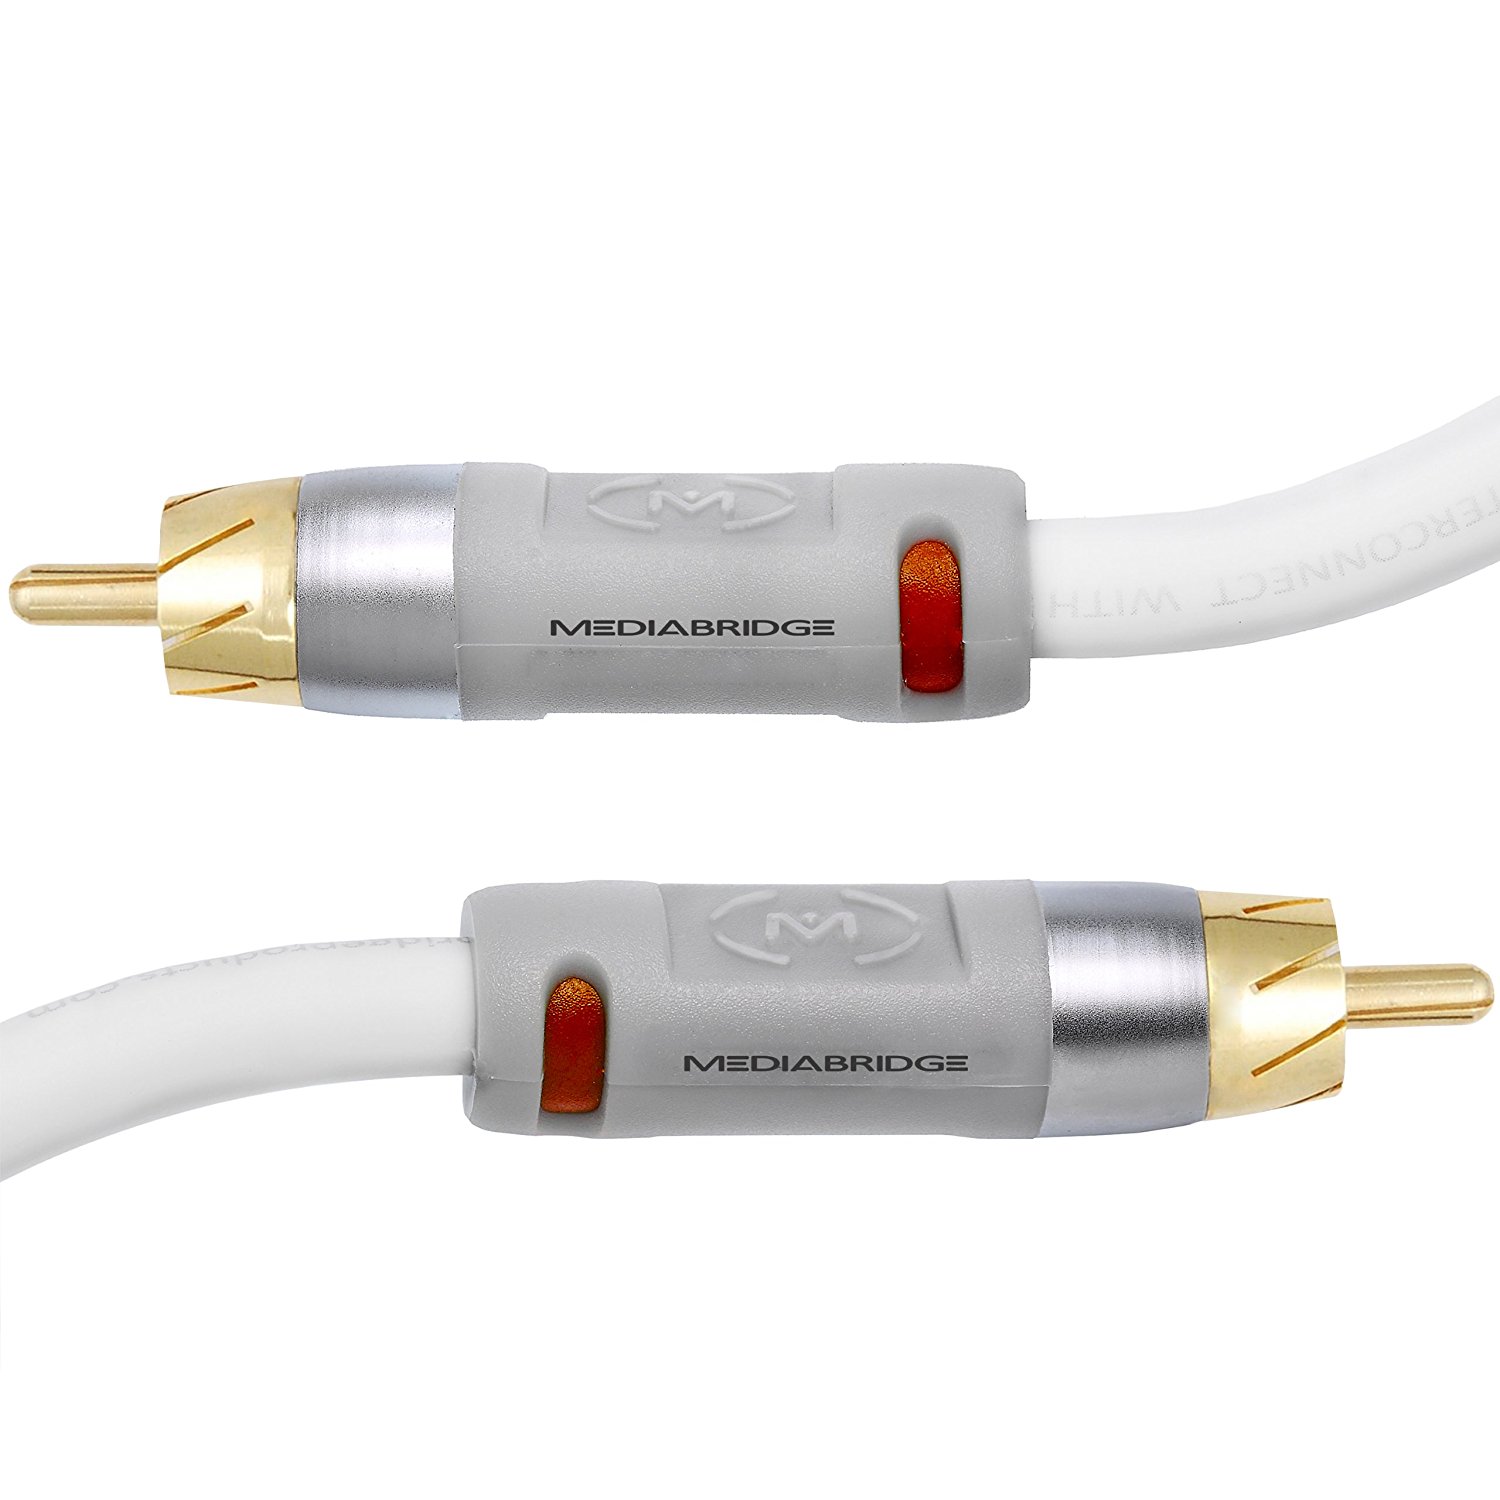 Mediabridge ULTRA Series Digital Audio Coaxial Cable (8 Feet) - Dual Shielded with RCA to RCA Gold-Plated Connectors - White - (Part# CJ08-6WR-G2 ) - image 2 of 4